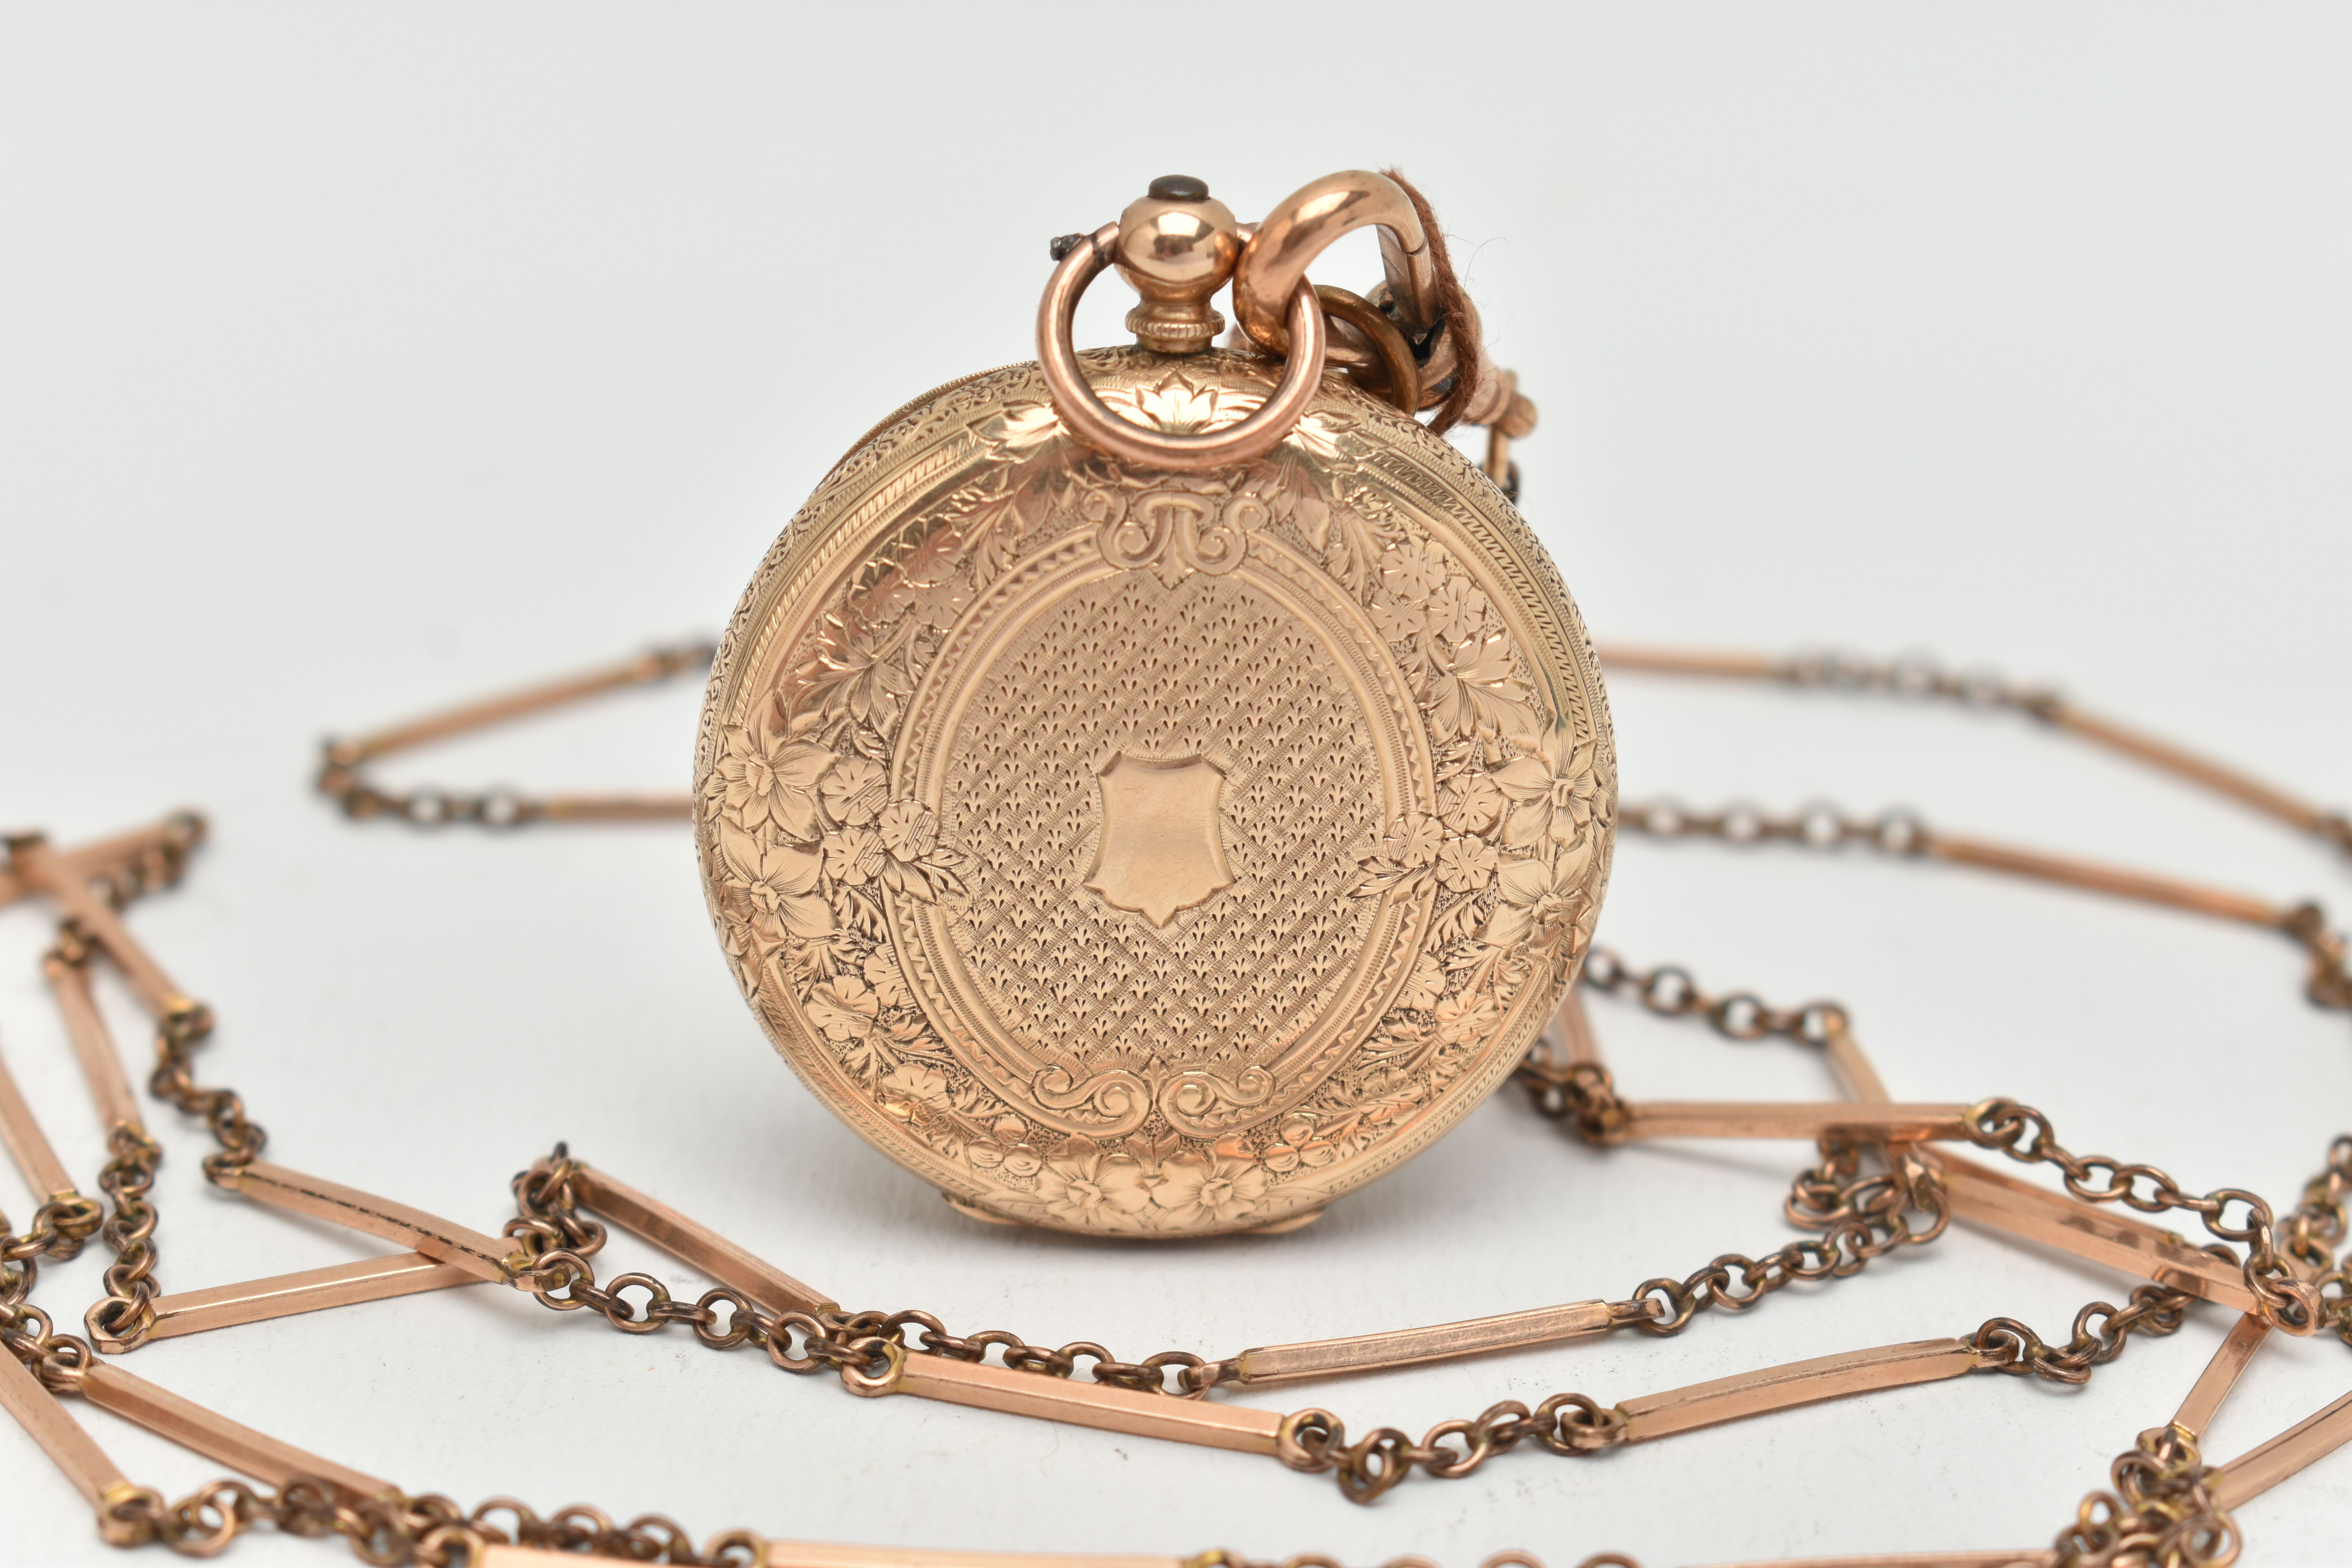 A YELLOW METAL POCKET WATCH AND LONGUARD CHAIN, key wound half hunter pocket watch, floral and - Image 3 of 6